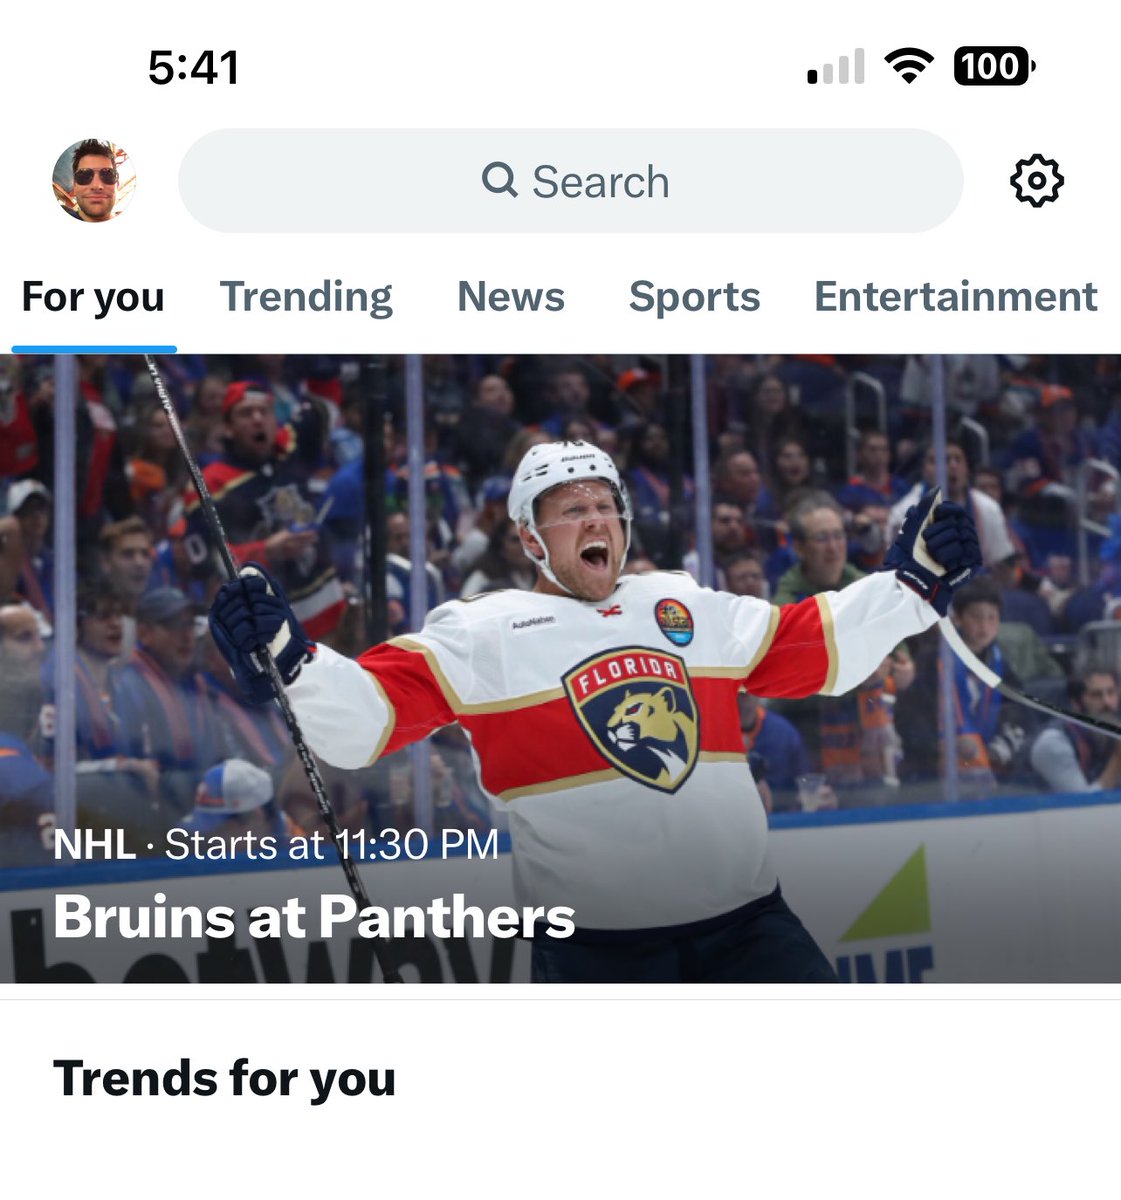 ⁦@goldieonice⁩ ⁦@NHL⁩ ⁦@FlaPanthers⁩ - Why do they ALWAYS list the incorrect time?

I will say that, usually, when you click on the photo it displays the correct game time.